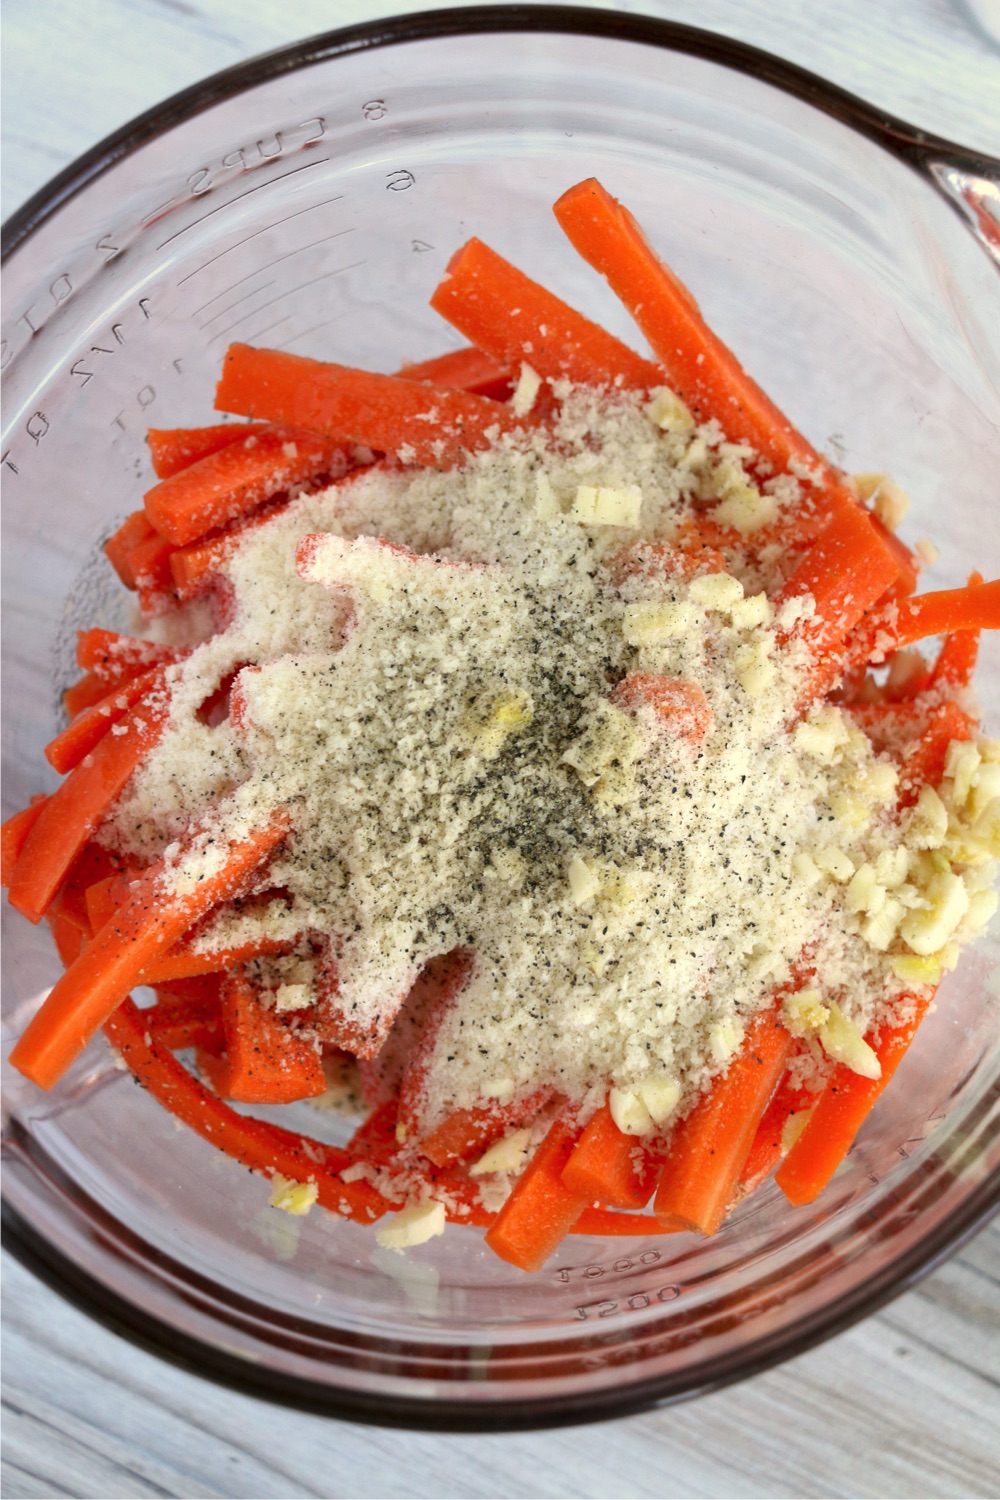 glass bowl filled with carrots and seasonings